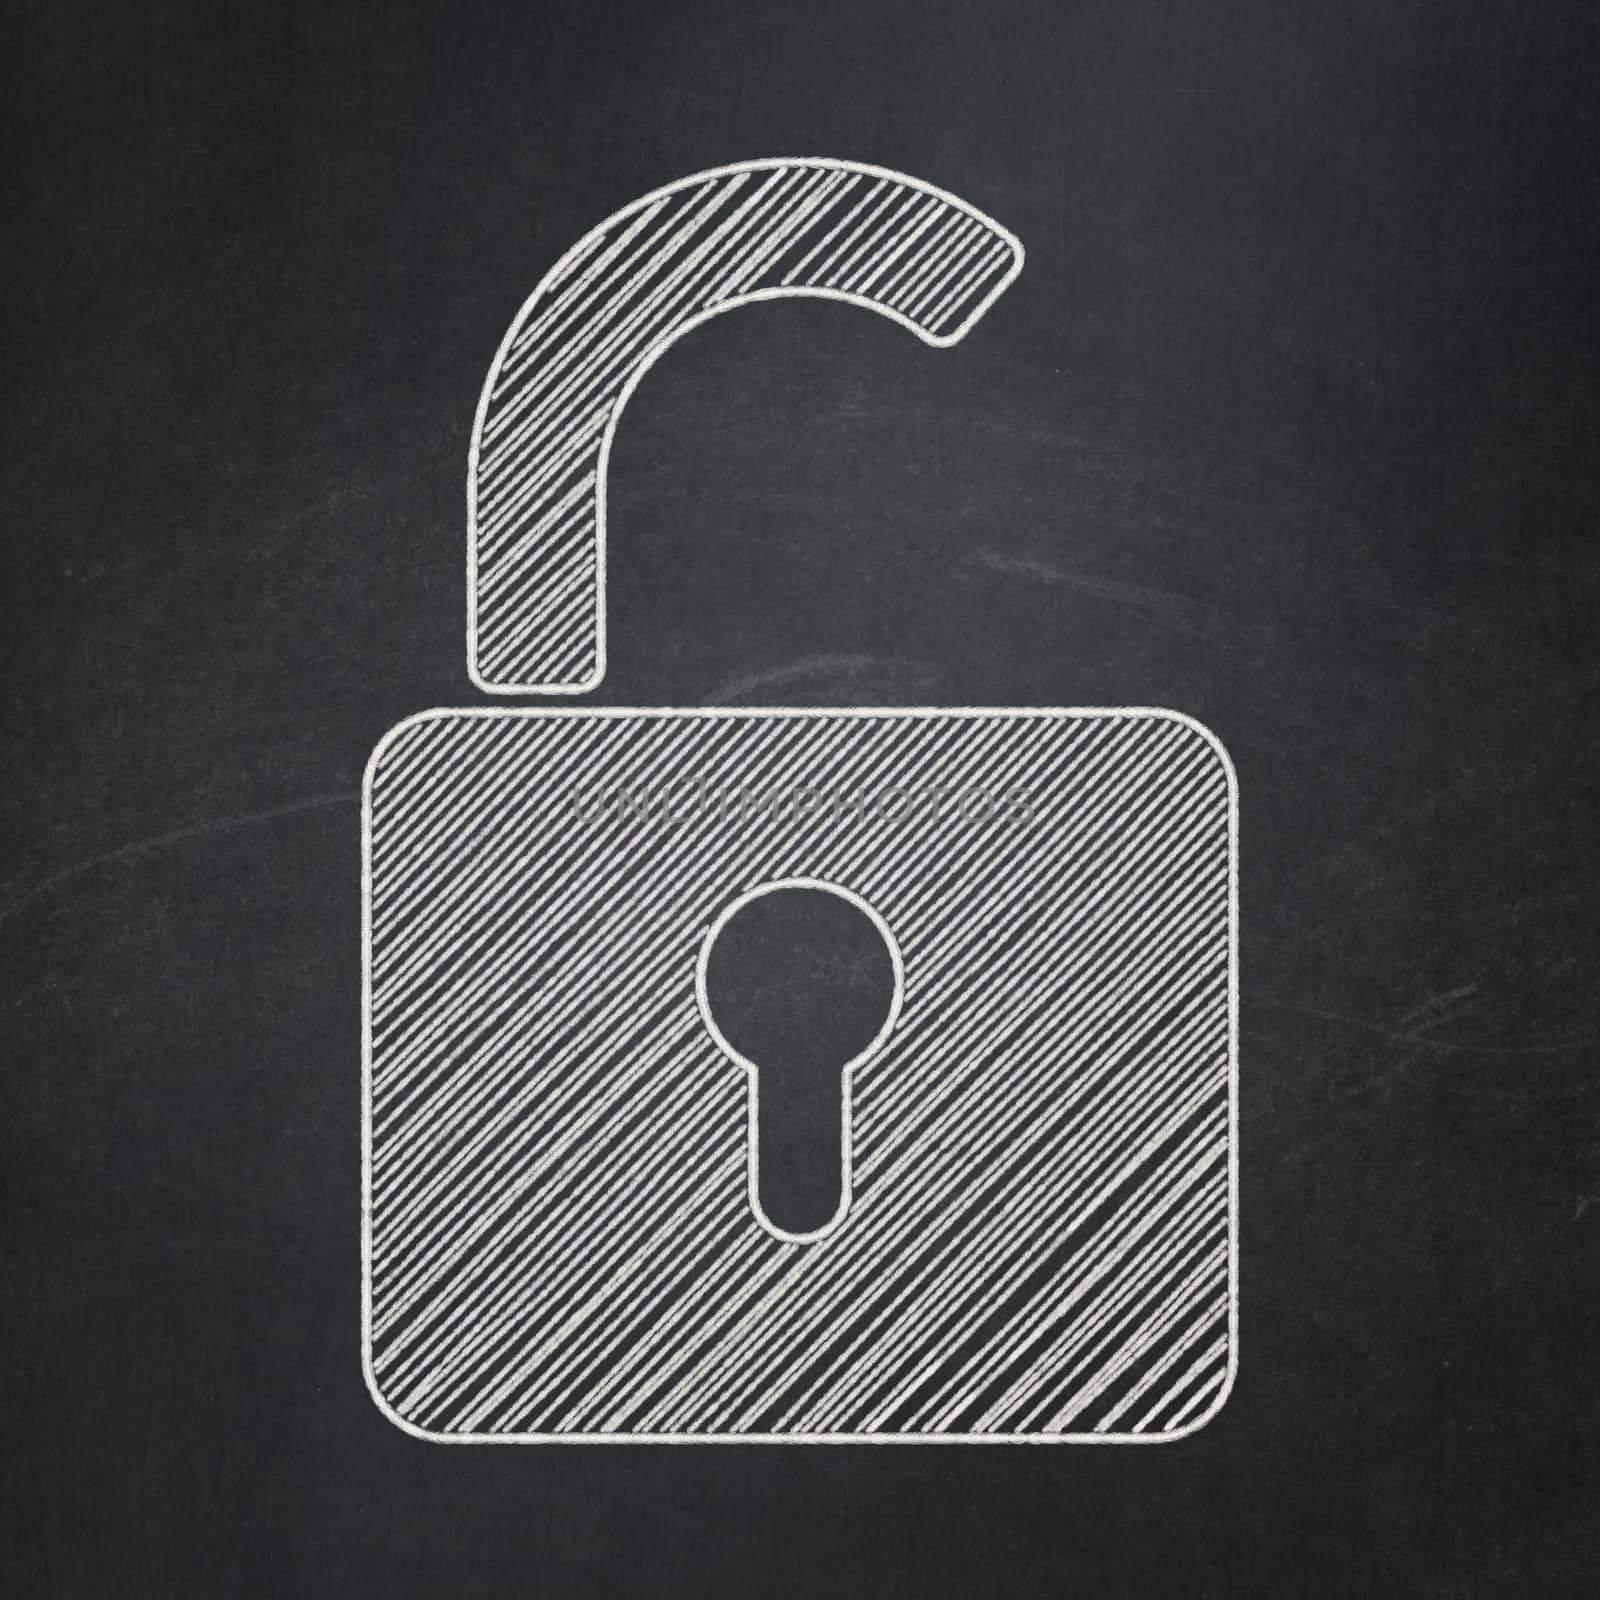 Protection concept: Opened Padlock icon on Black chalkboard background, 3d render